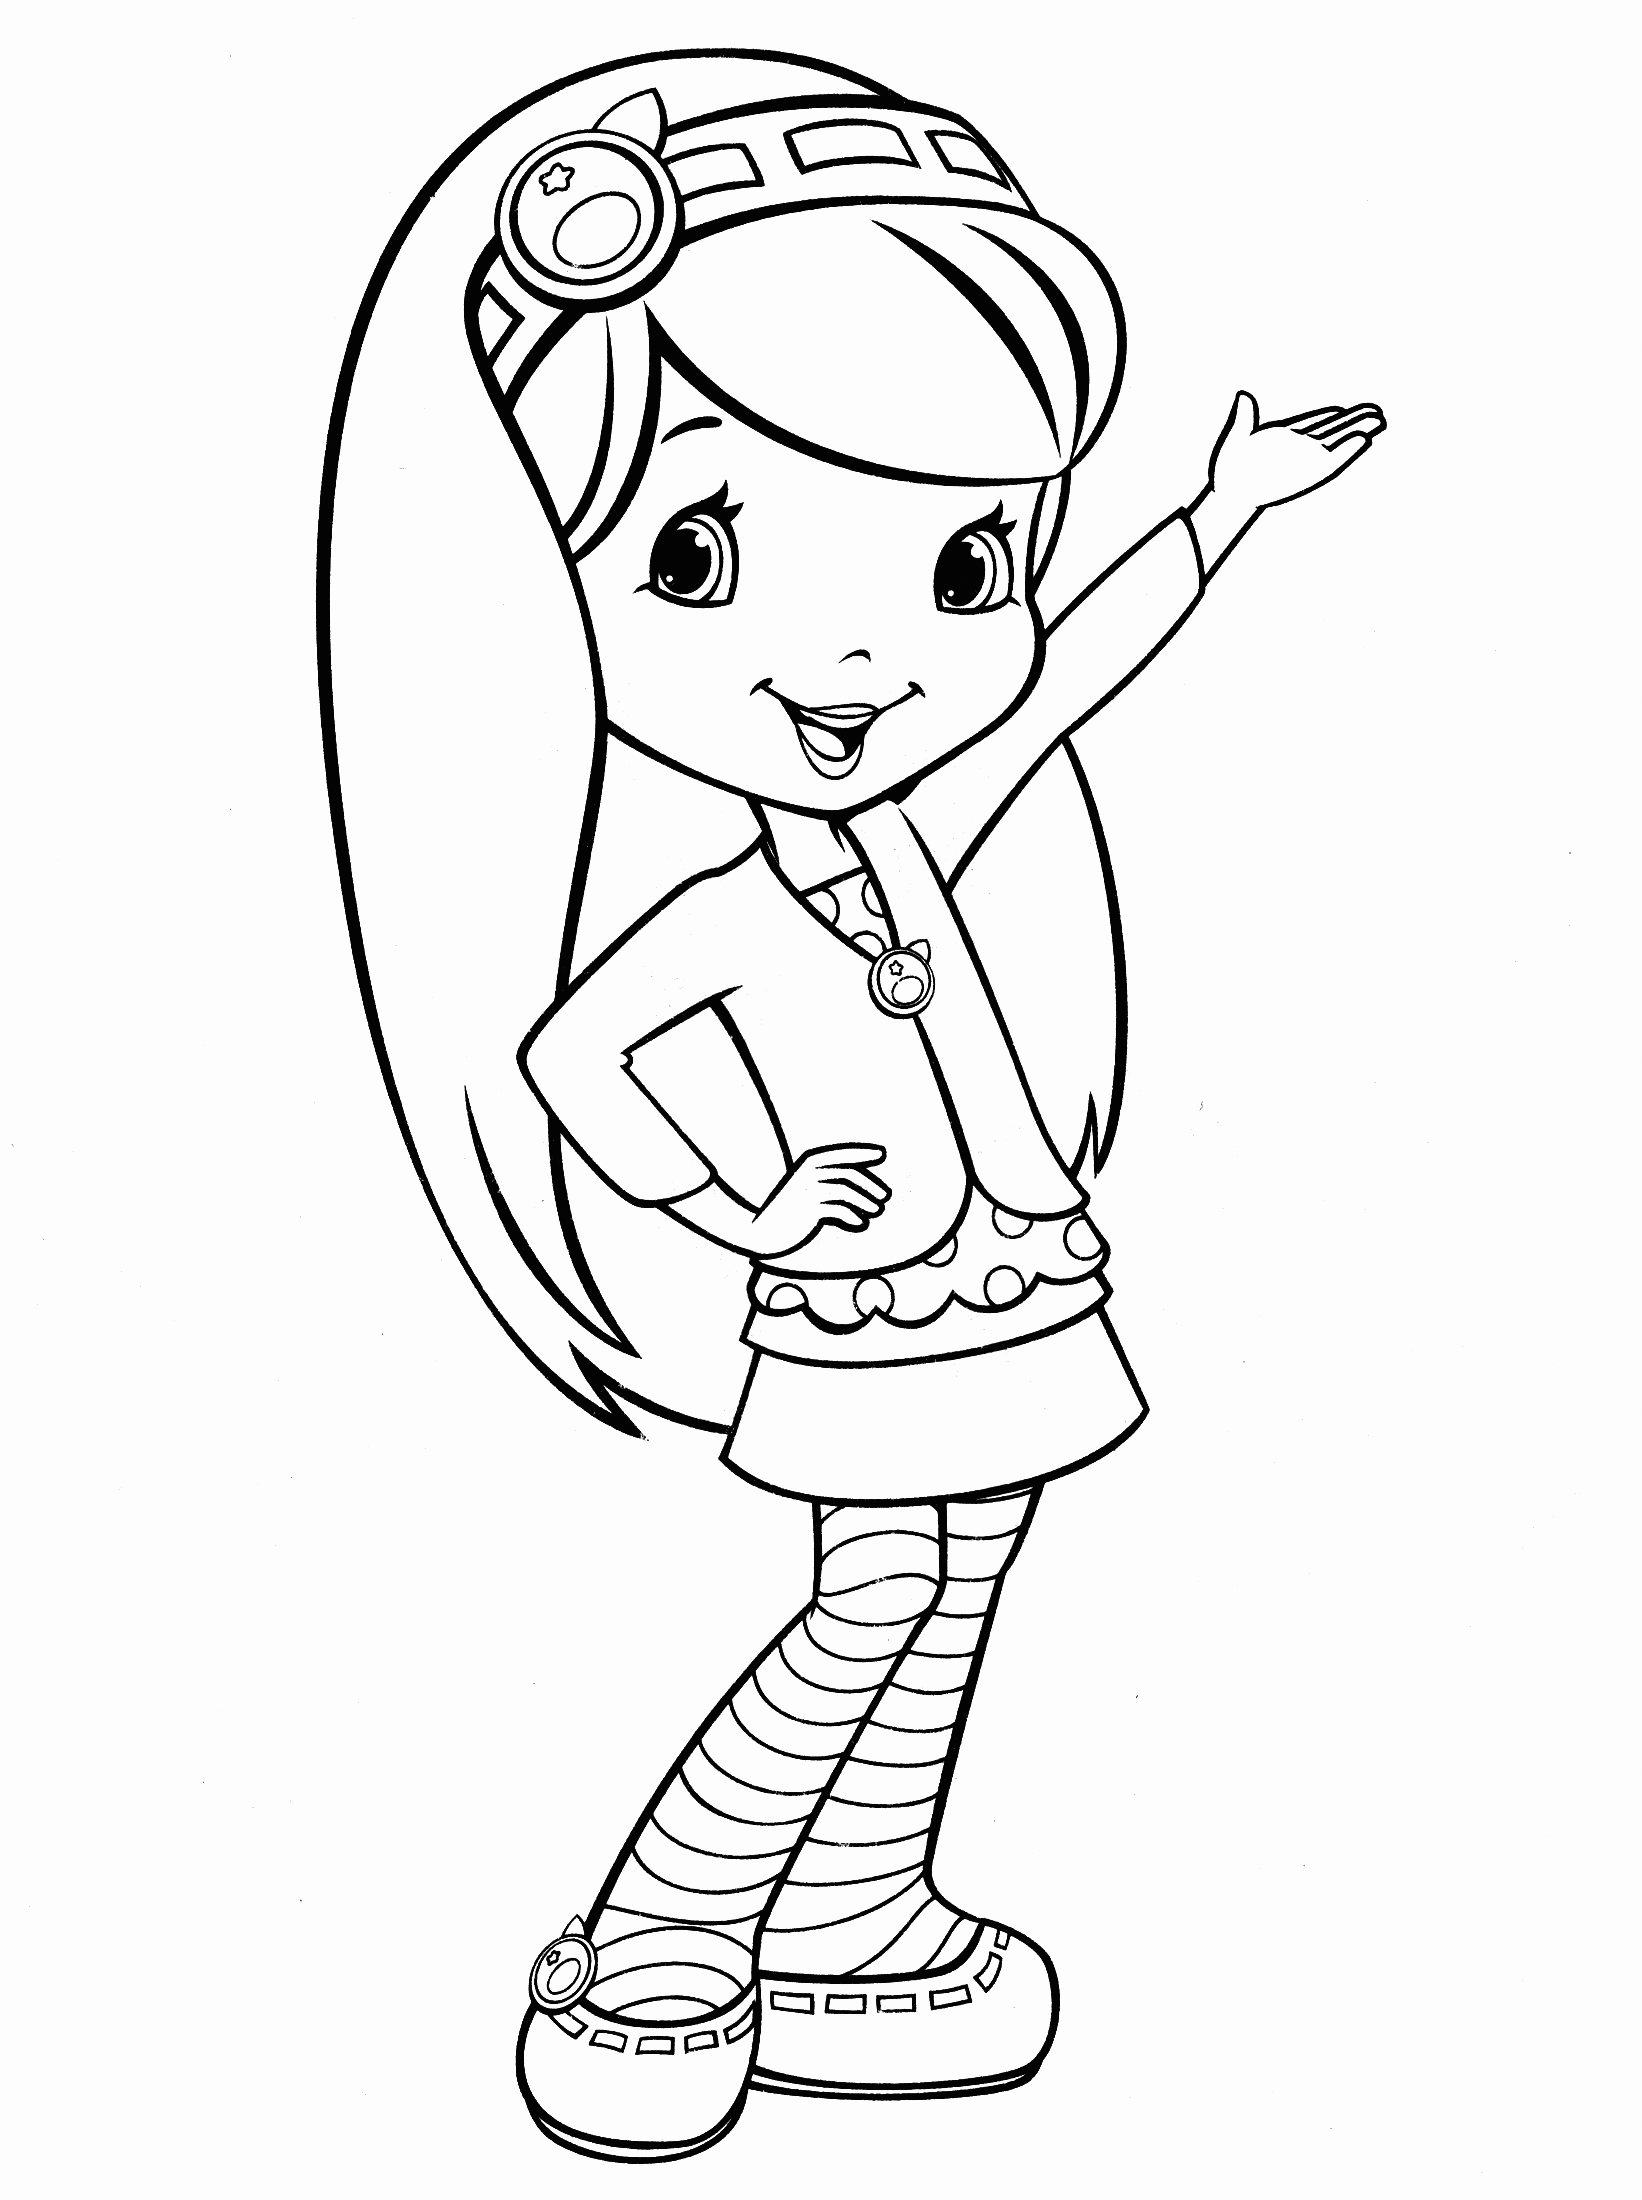 Blueberry Muffin Girl Coloring Page